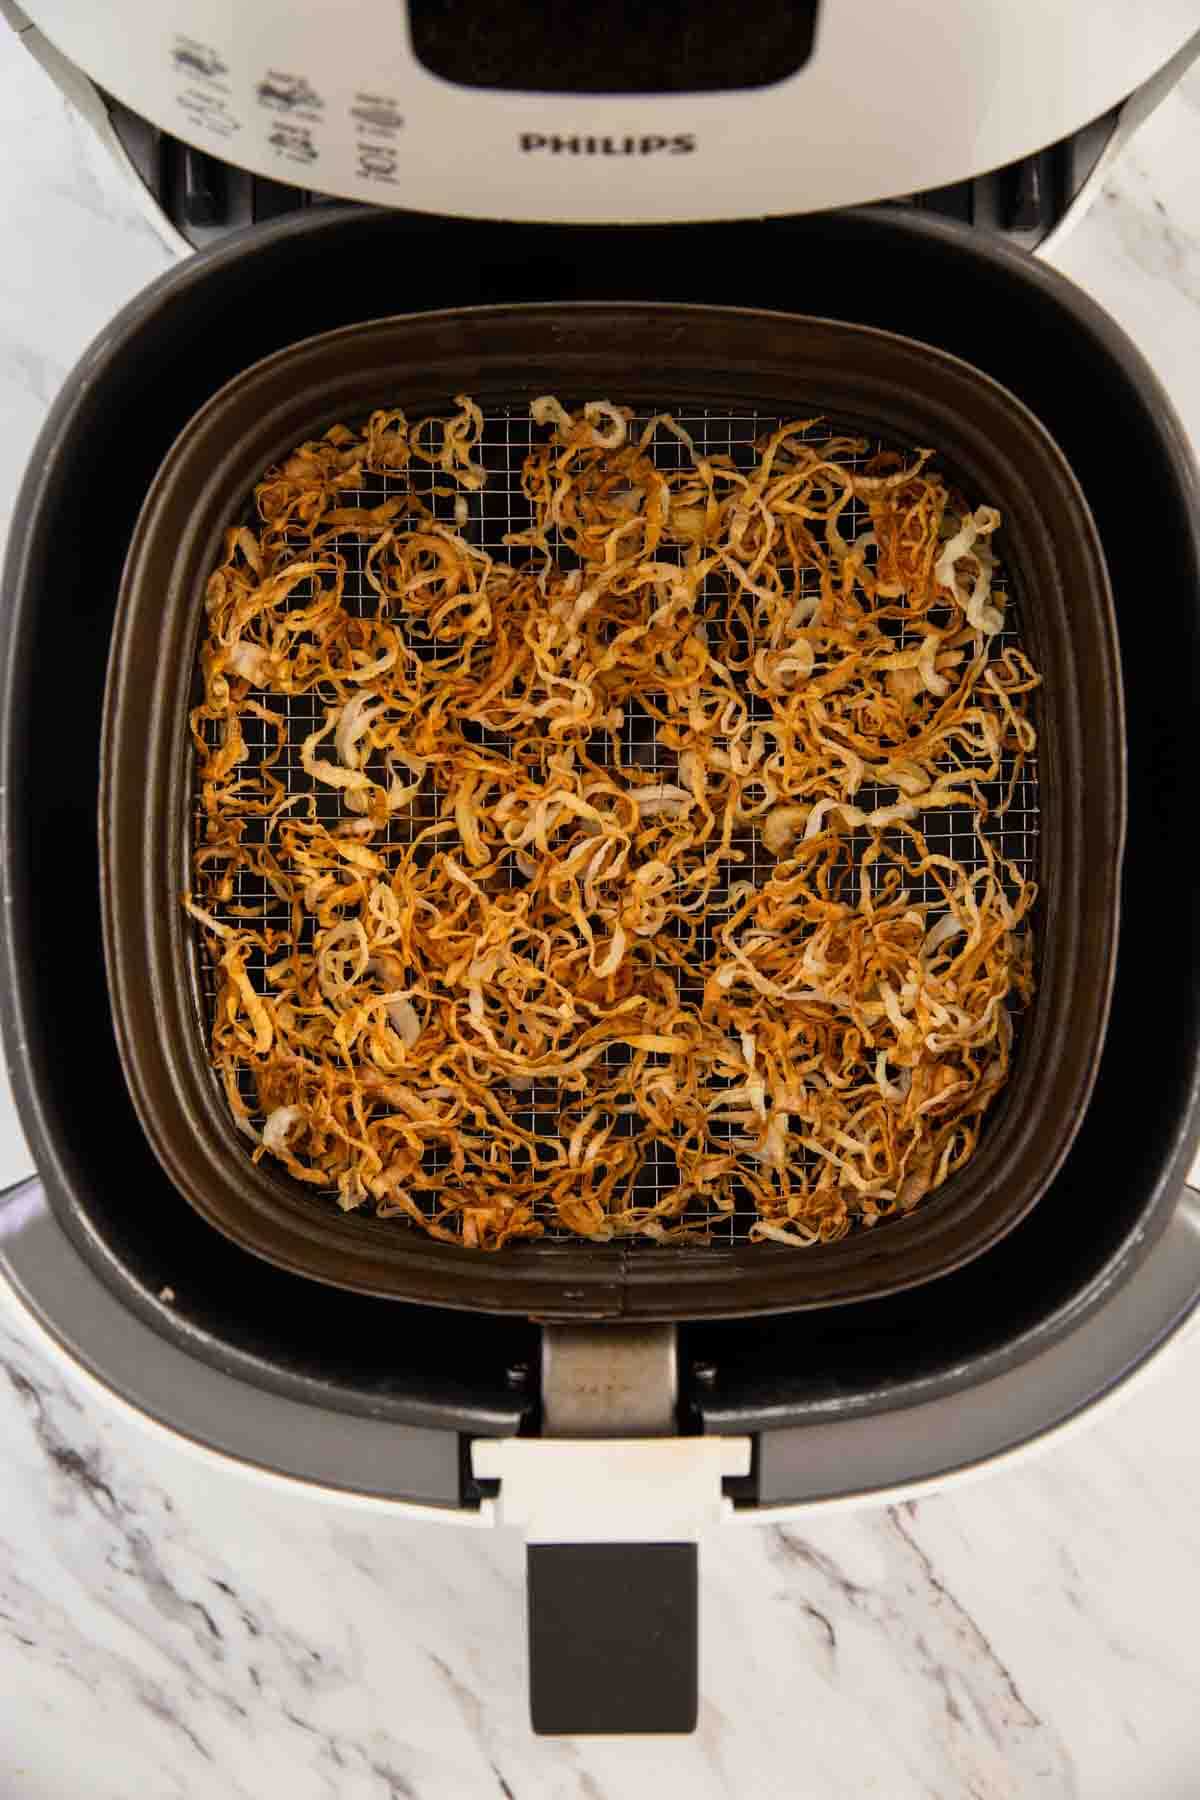 * Air fryer crispy onions after the frying process is done.